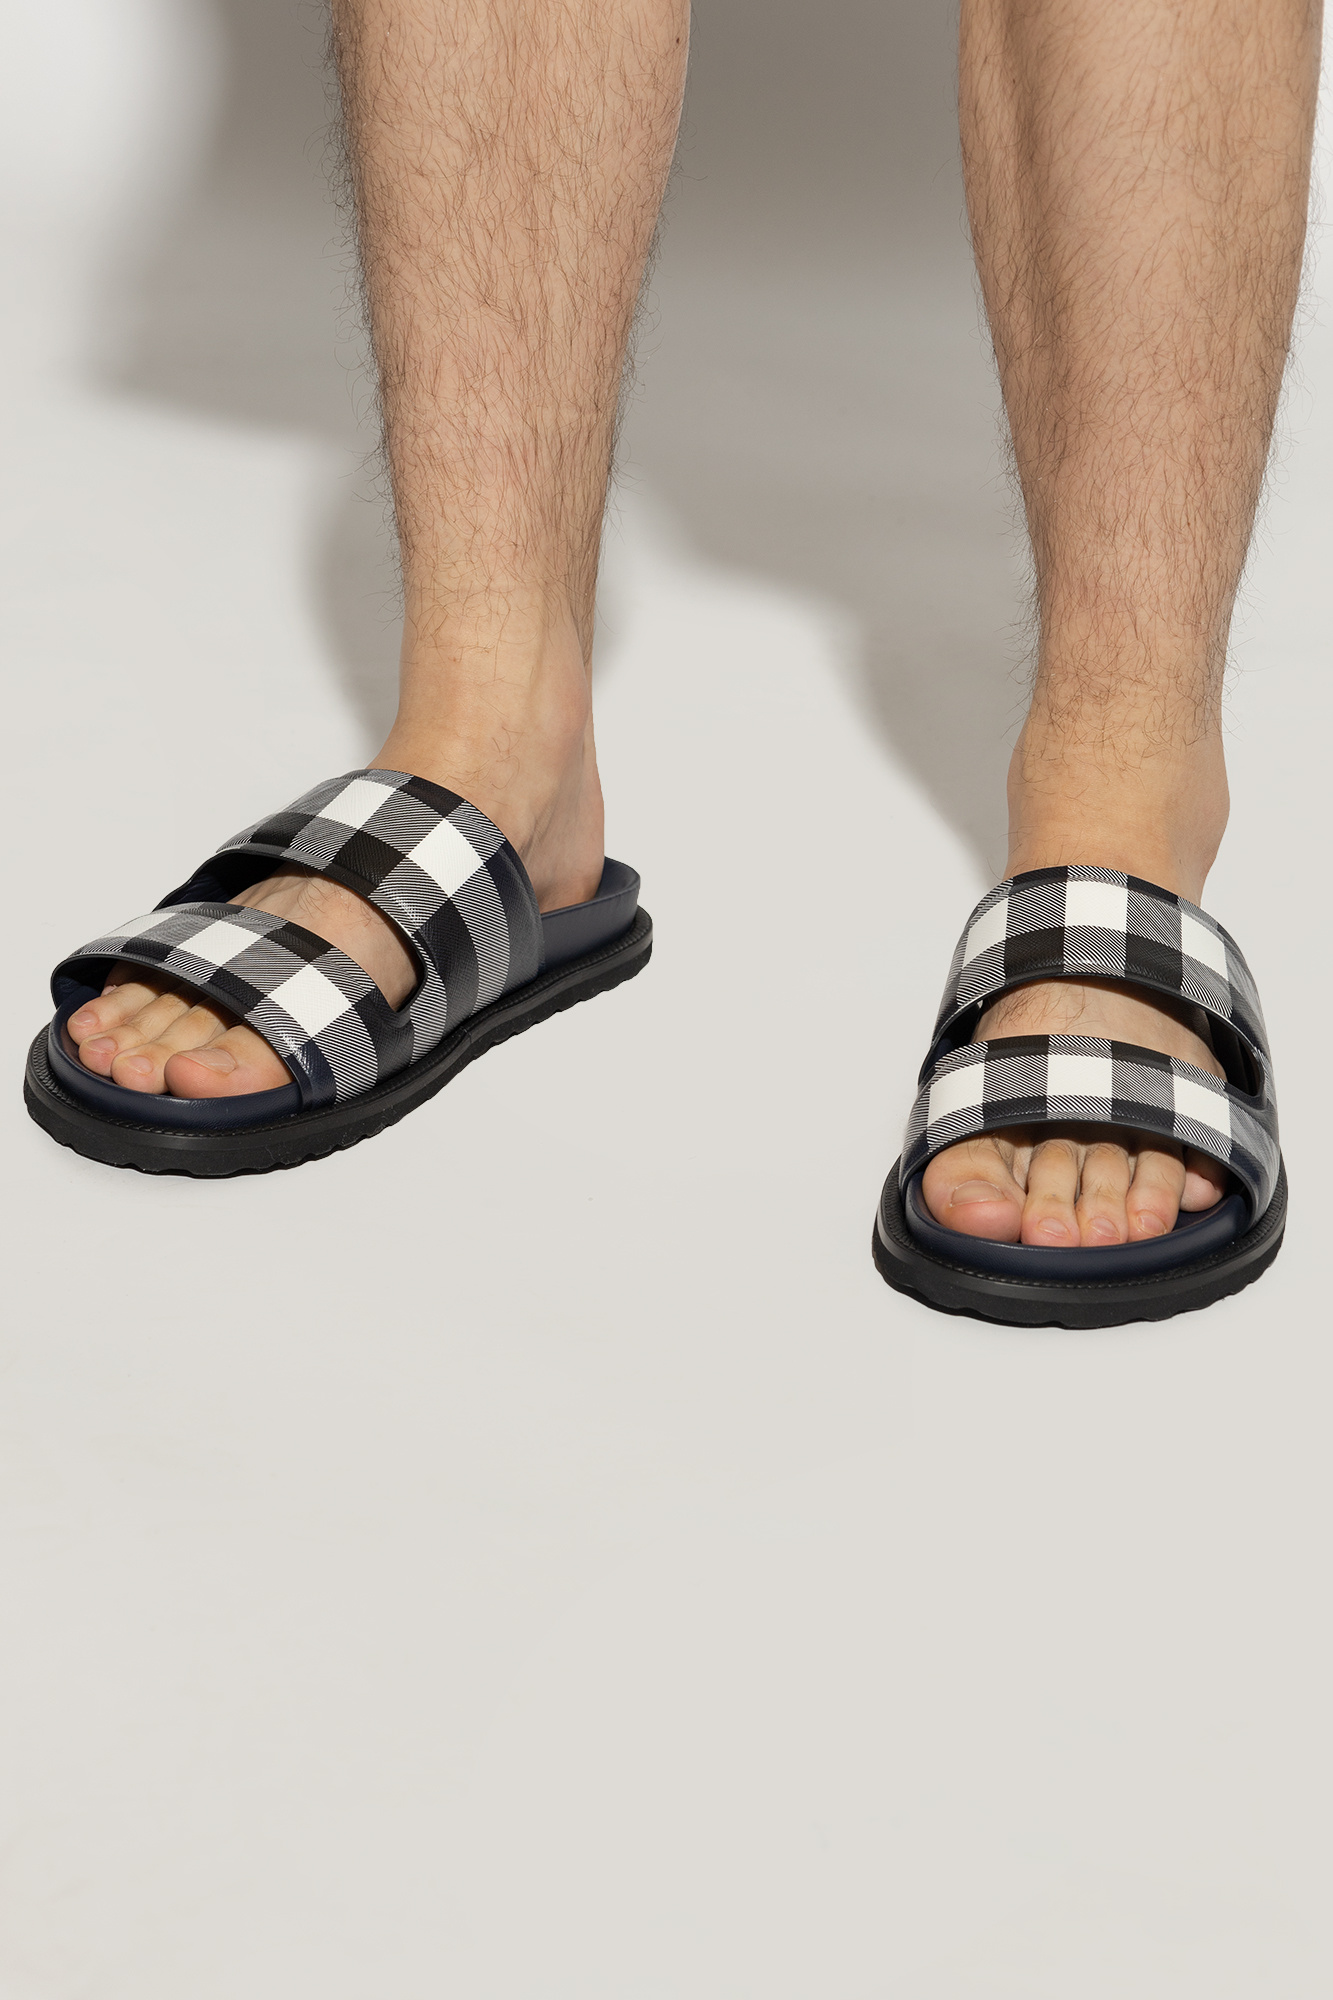 burberry Trenchcoat ‘Thor’ checked slides